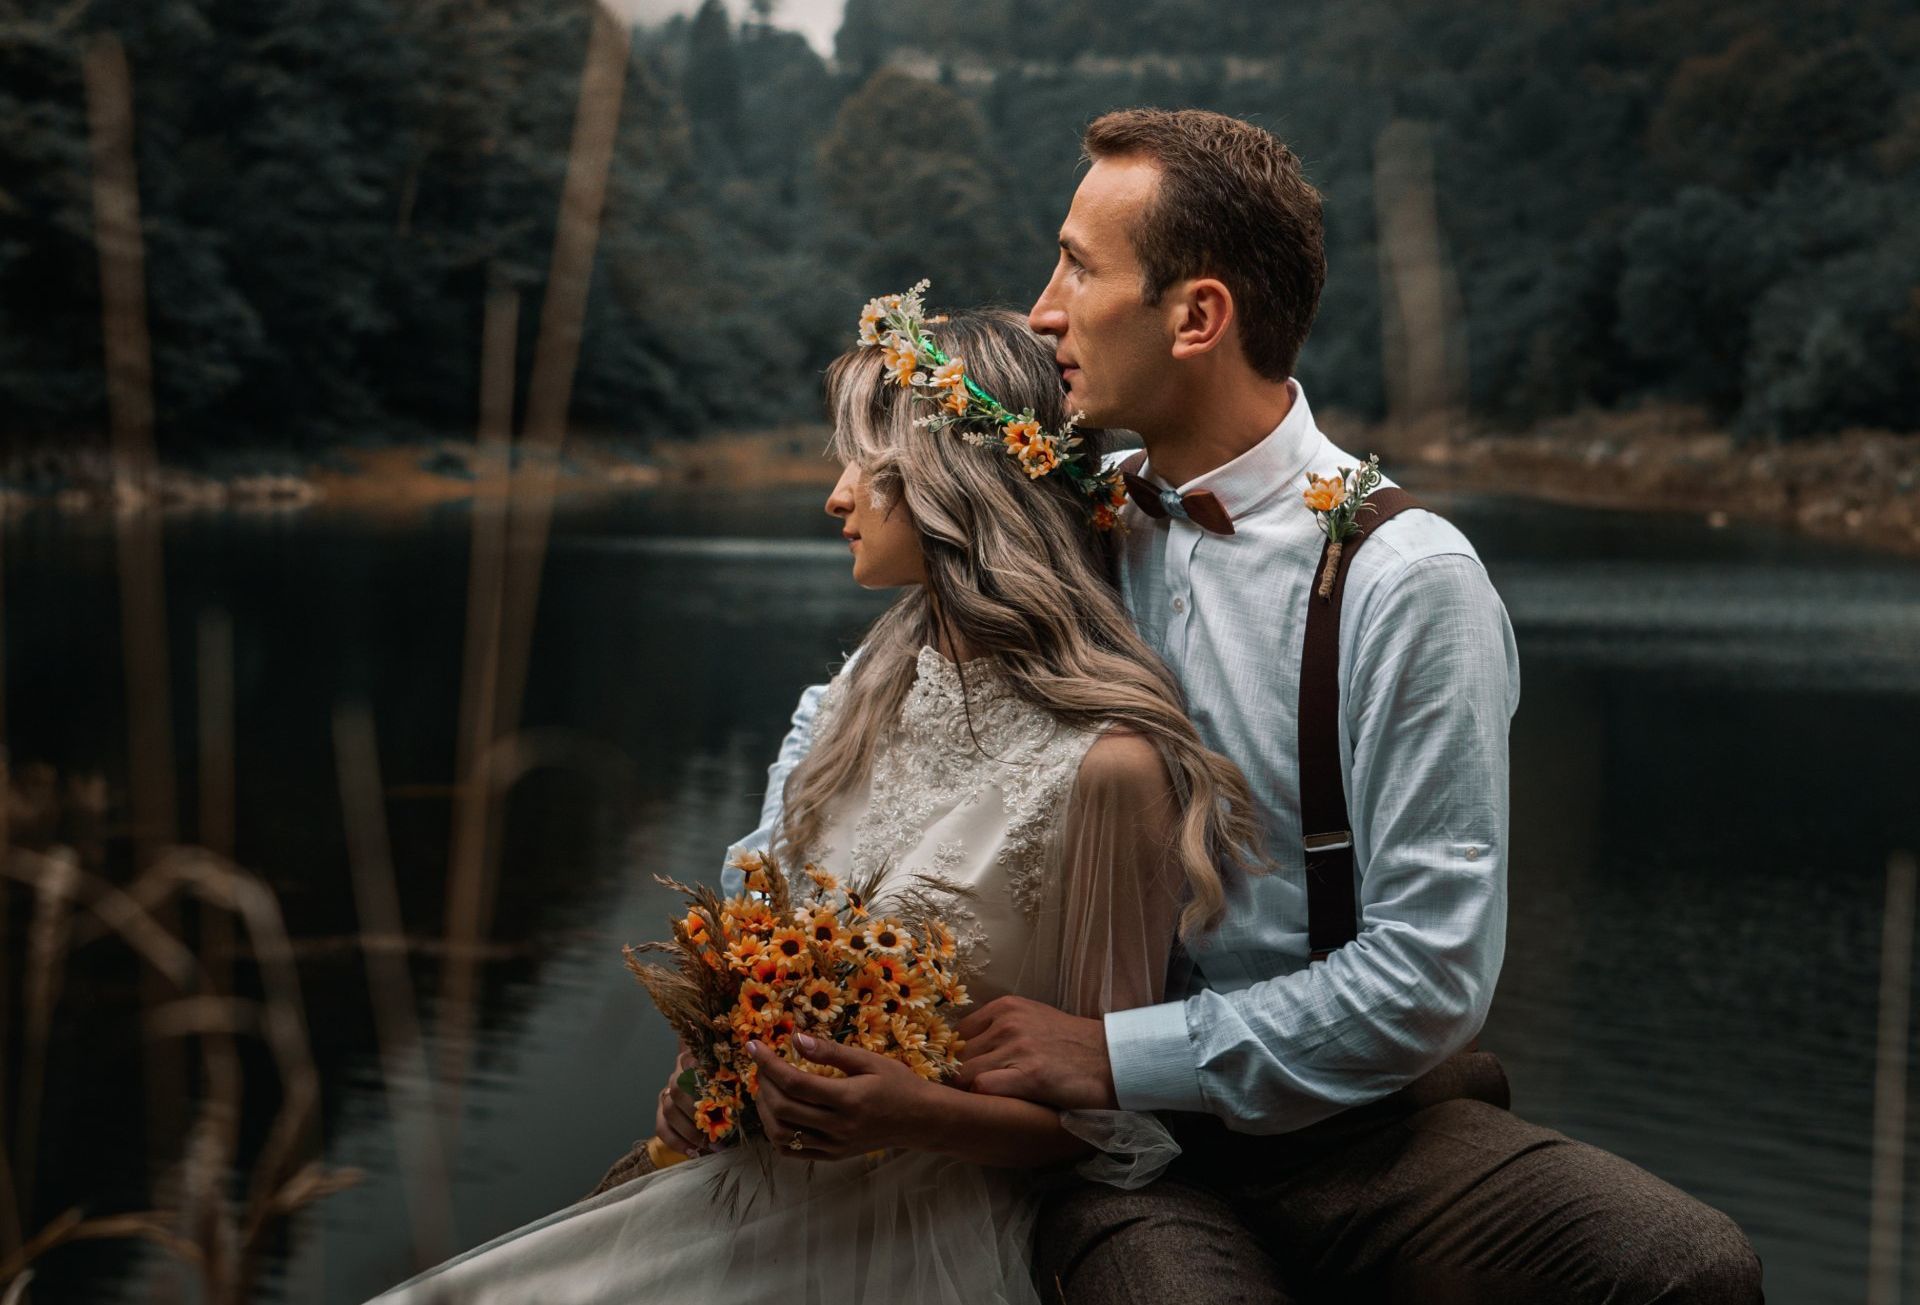 A couple sits by a Vermont lake, where the bride, adorned with an orange flower crown, is held by her groom.